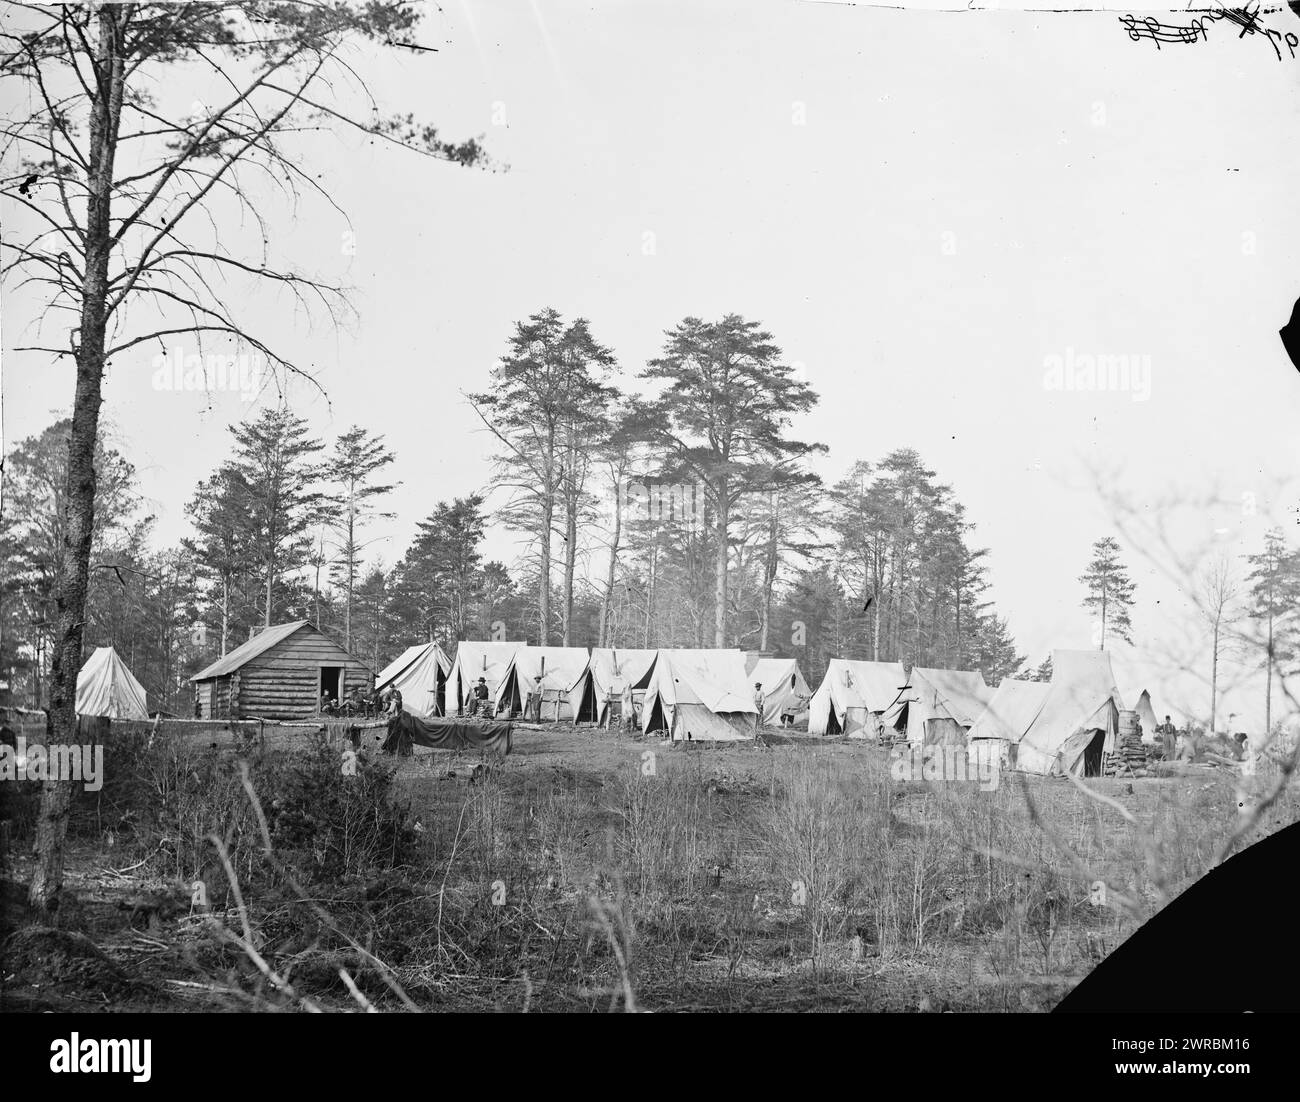 Brandy Station, Va. Chief Engineer's camp at Army of the Potomac headquarters, Photograph from the main eastern theater of the war, winter quarters at Brandy Station, December 1863-April 1864., 1864 February., United States, History, Civil War, 1861-1865, Military facilities, Wet collodion negatives., Wet collodion negatives, 1 negative: glass, wet collodion Stock Photo